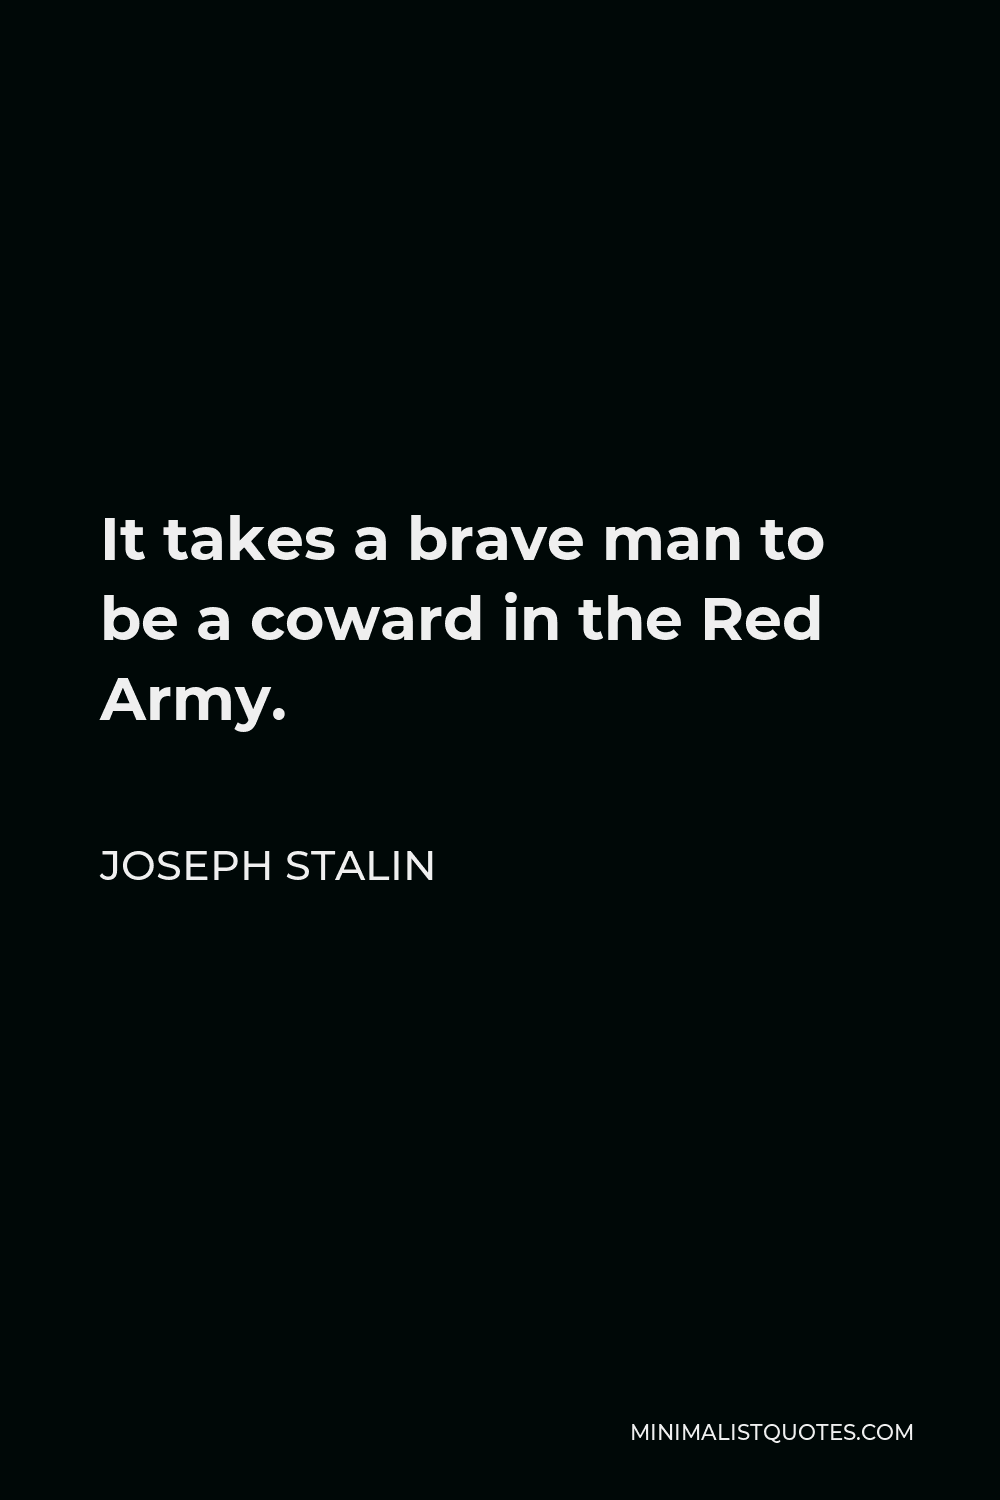 Joseph Stalin Quote - It takes a brave man to be a coward in the Red Army.